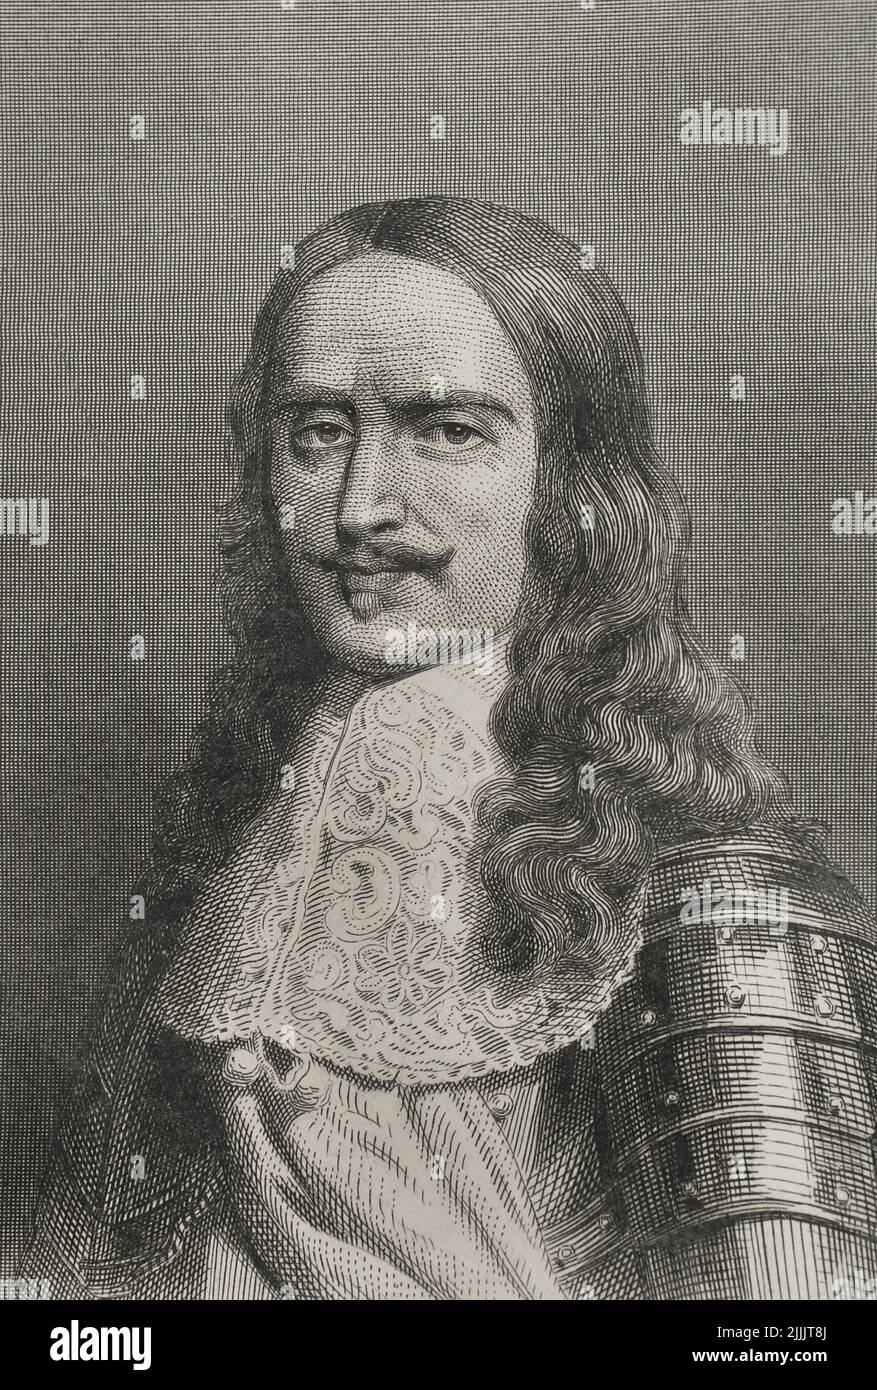 Henri de la Tour d'Auvergne-Bouillon (1611-1675). French nobleman and military. Appointed Marshal of France in 1643 and Marshal-General of the Camps and Armies of the King in 1660. Portrait. Engraving by Geoffroy. "Historia Universal", by César Cantú. Volume VIII. 1858. Stock Photo